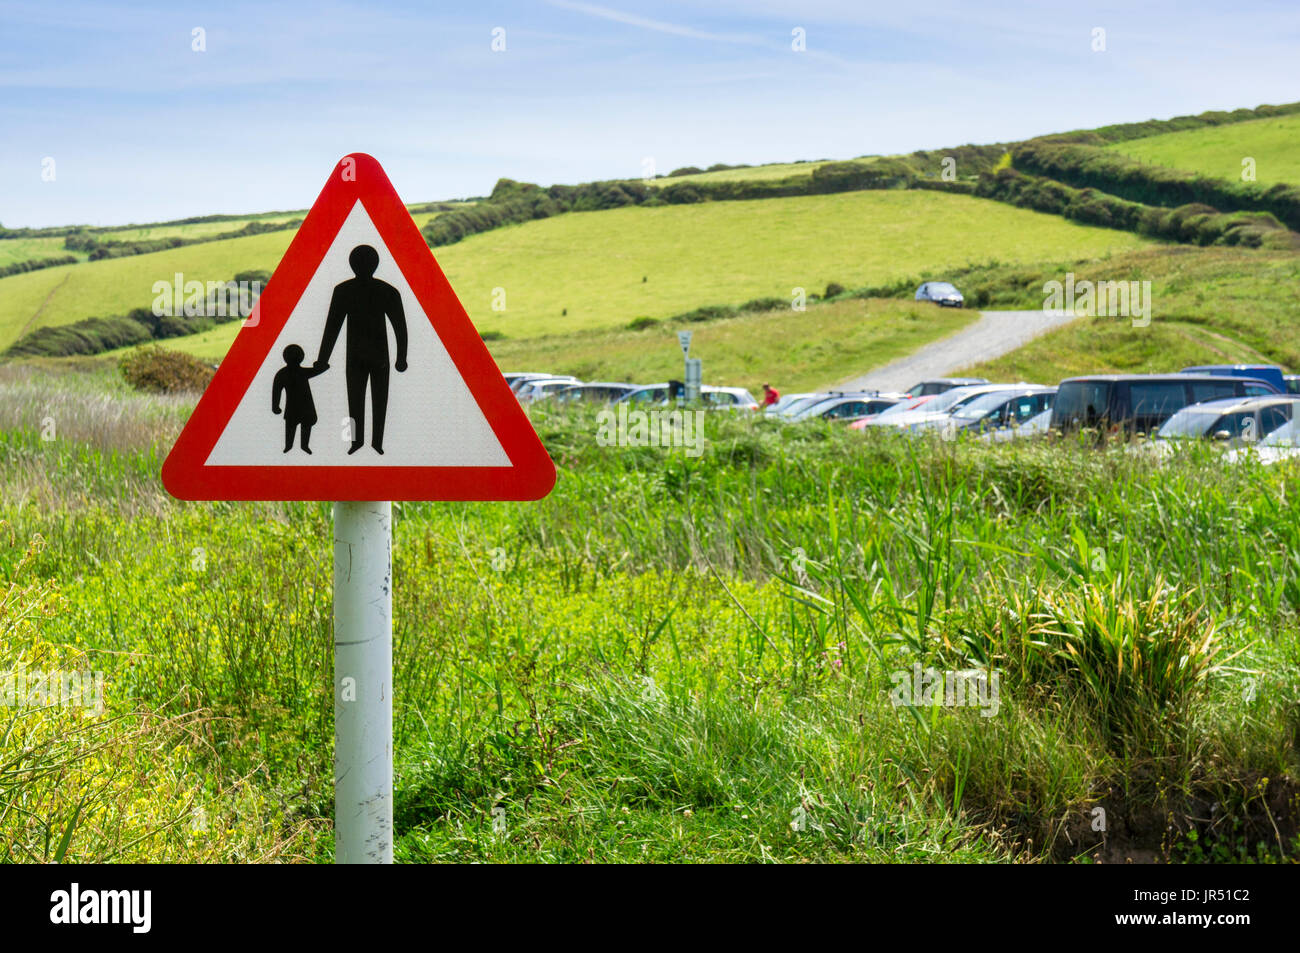 Warning sign for pedestrians crossing in the countryside, road safety, England, UK Stock Photo